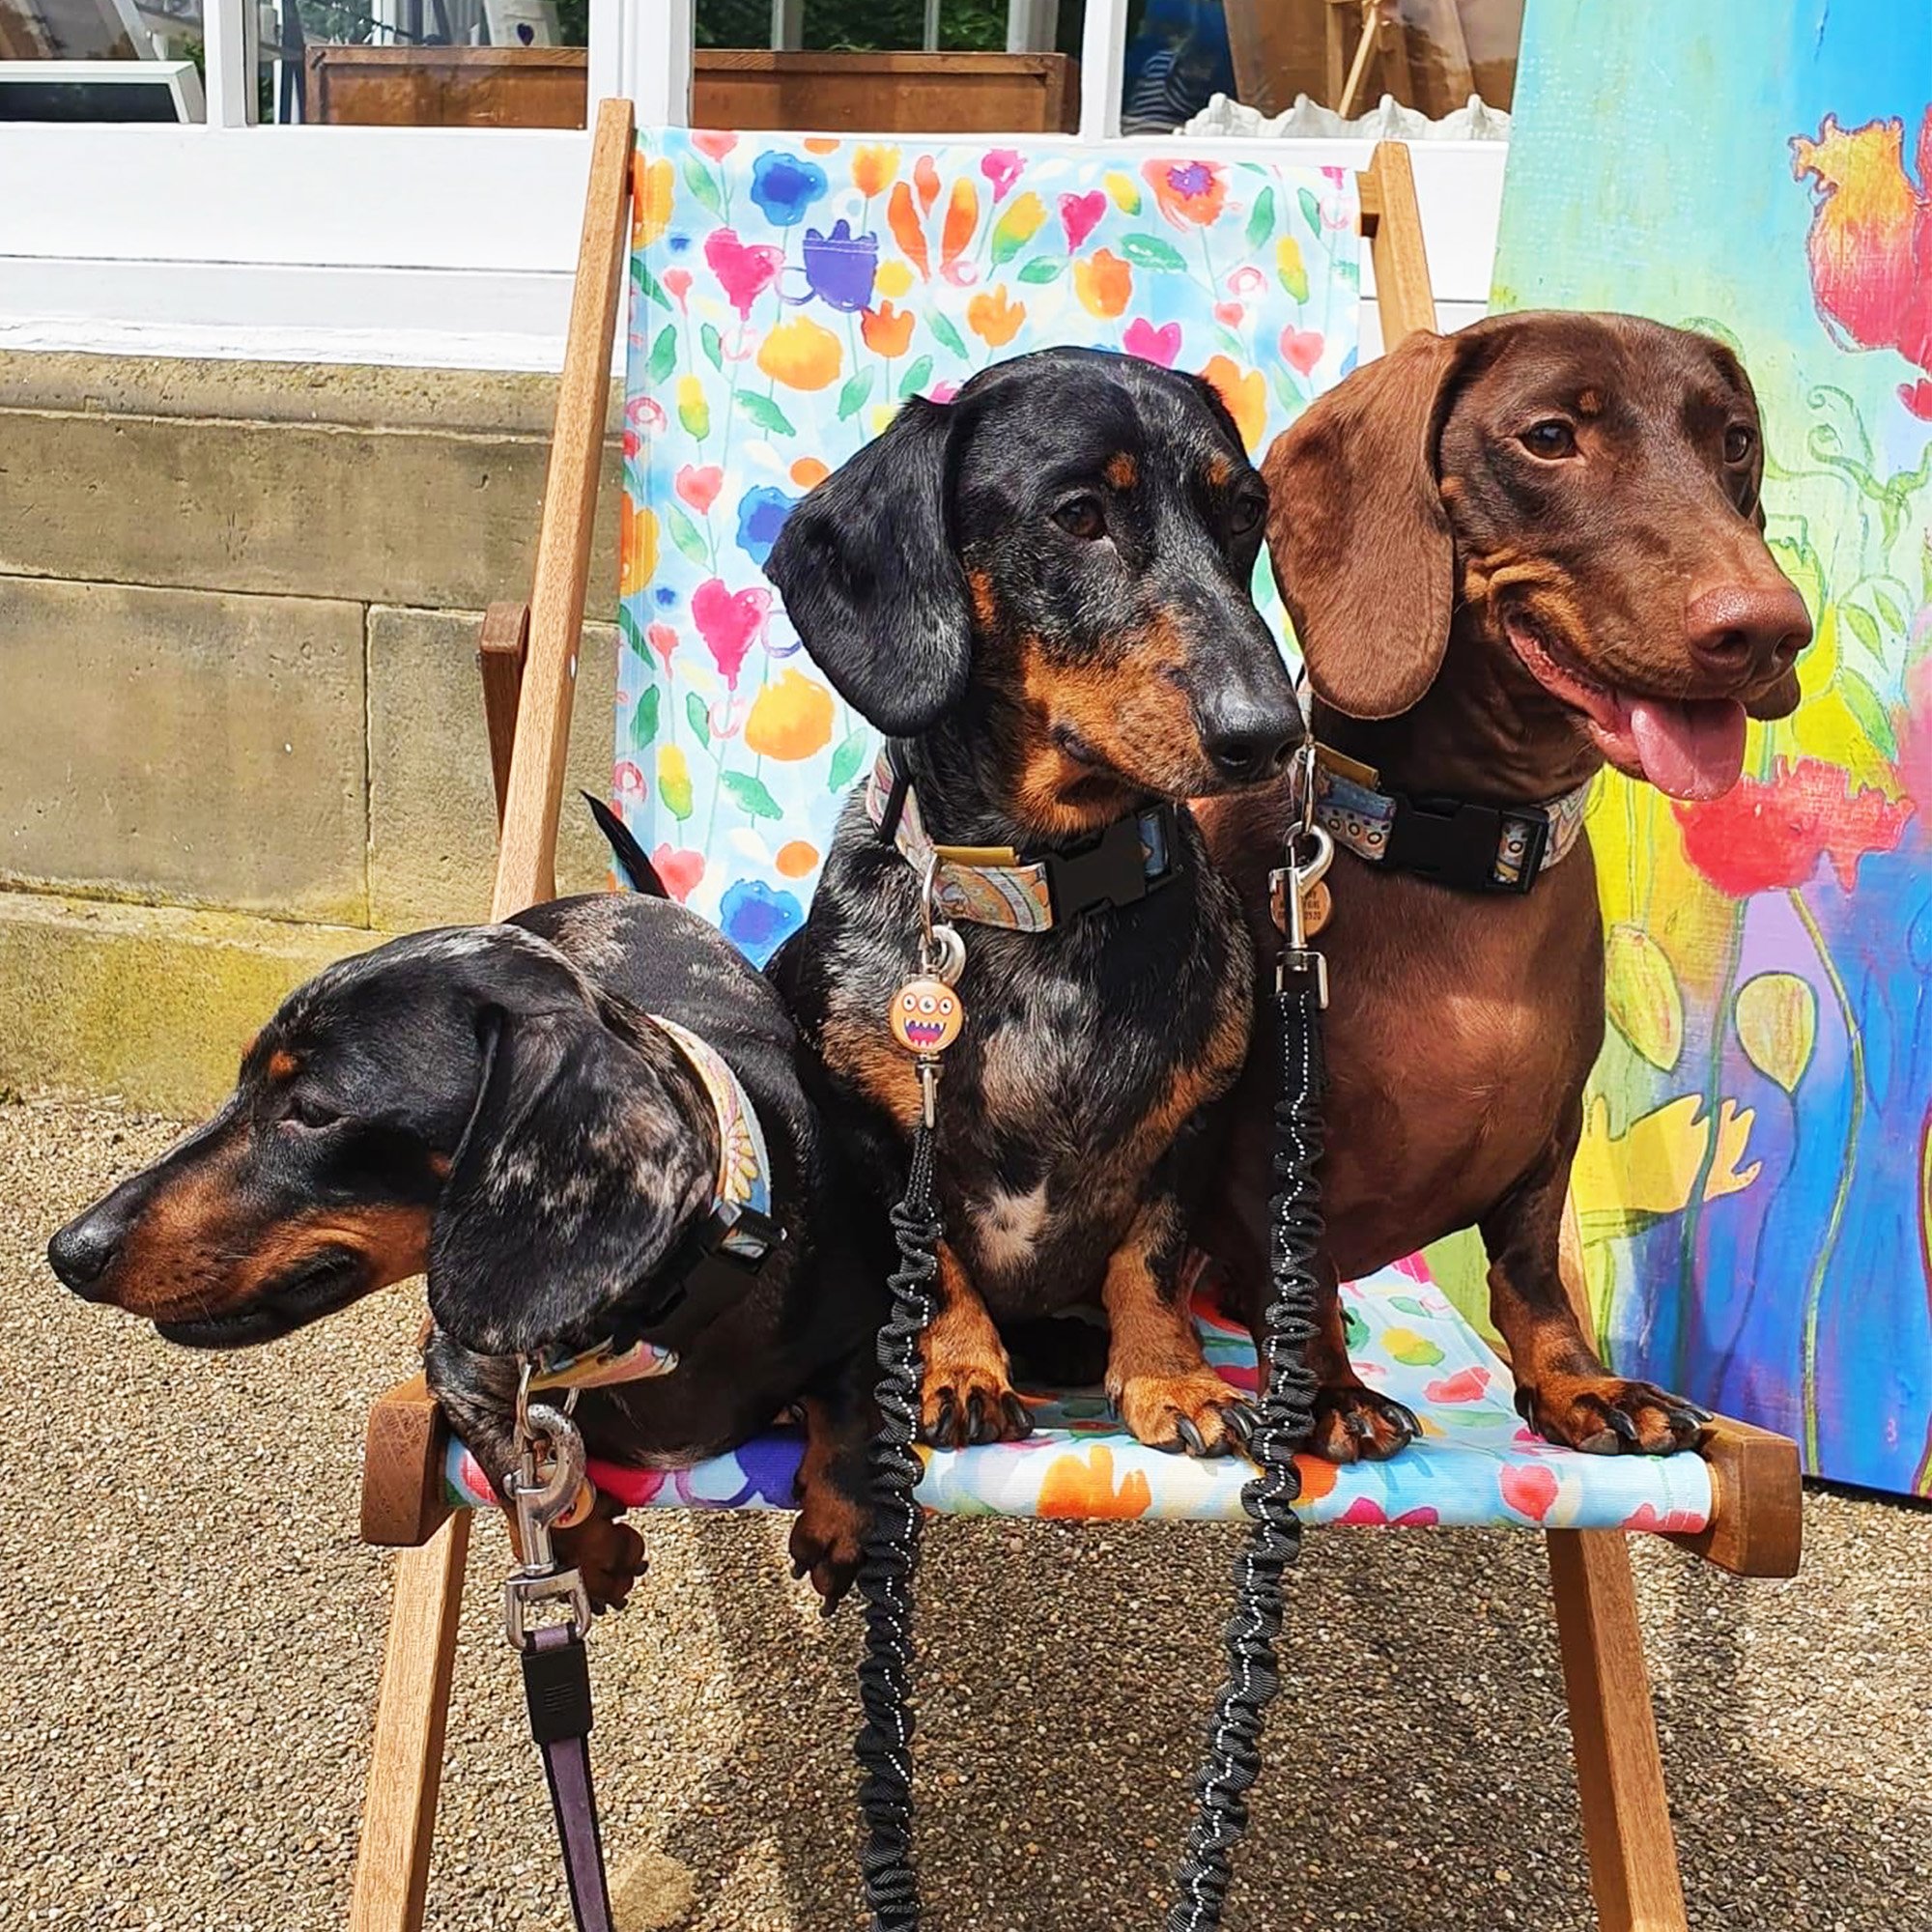 For anyone who thought our deckchairs were made for humans, we apologise for any confusion caused... 🐶

Just kidding, you and your pup can enjoy the sunny weather together, if they'll make  room for you that is! ☀️

Our pre-order window for deckchai